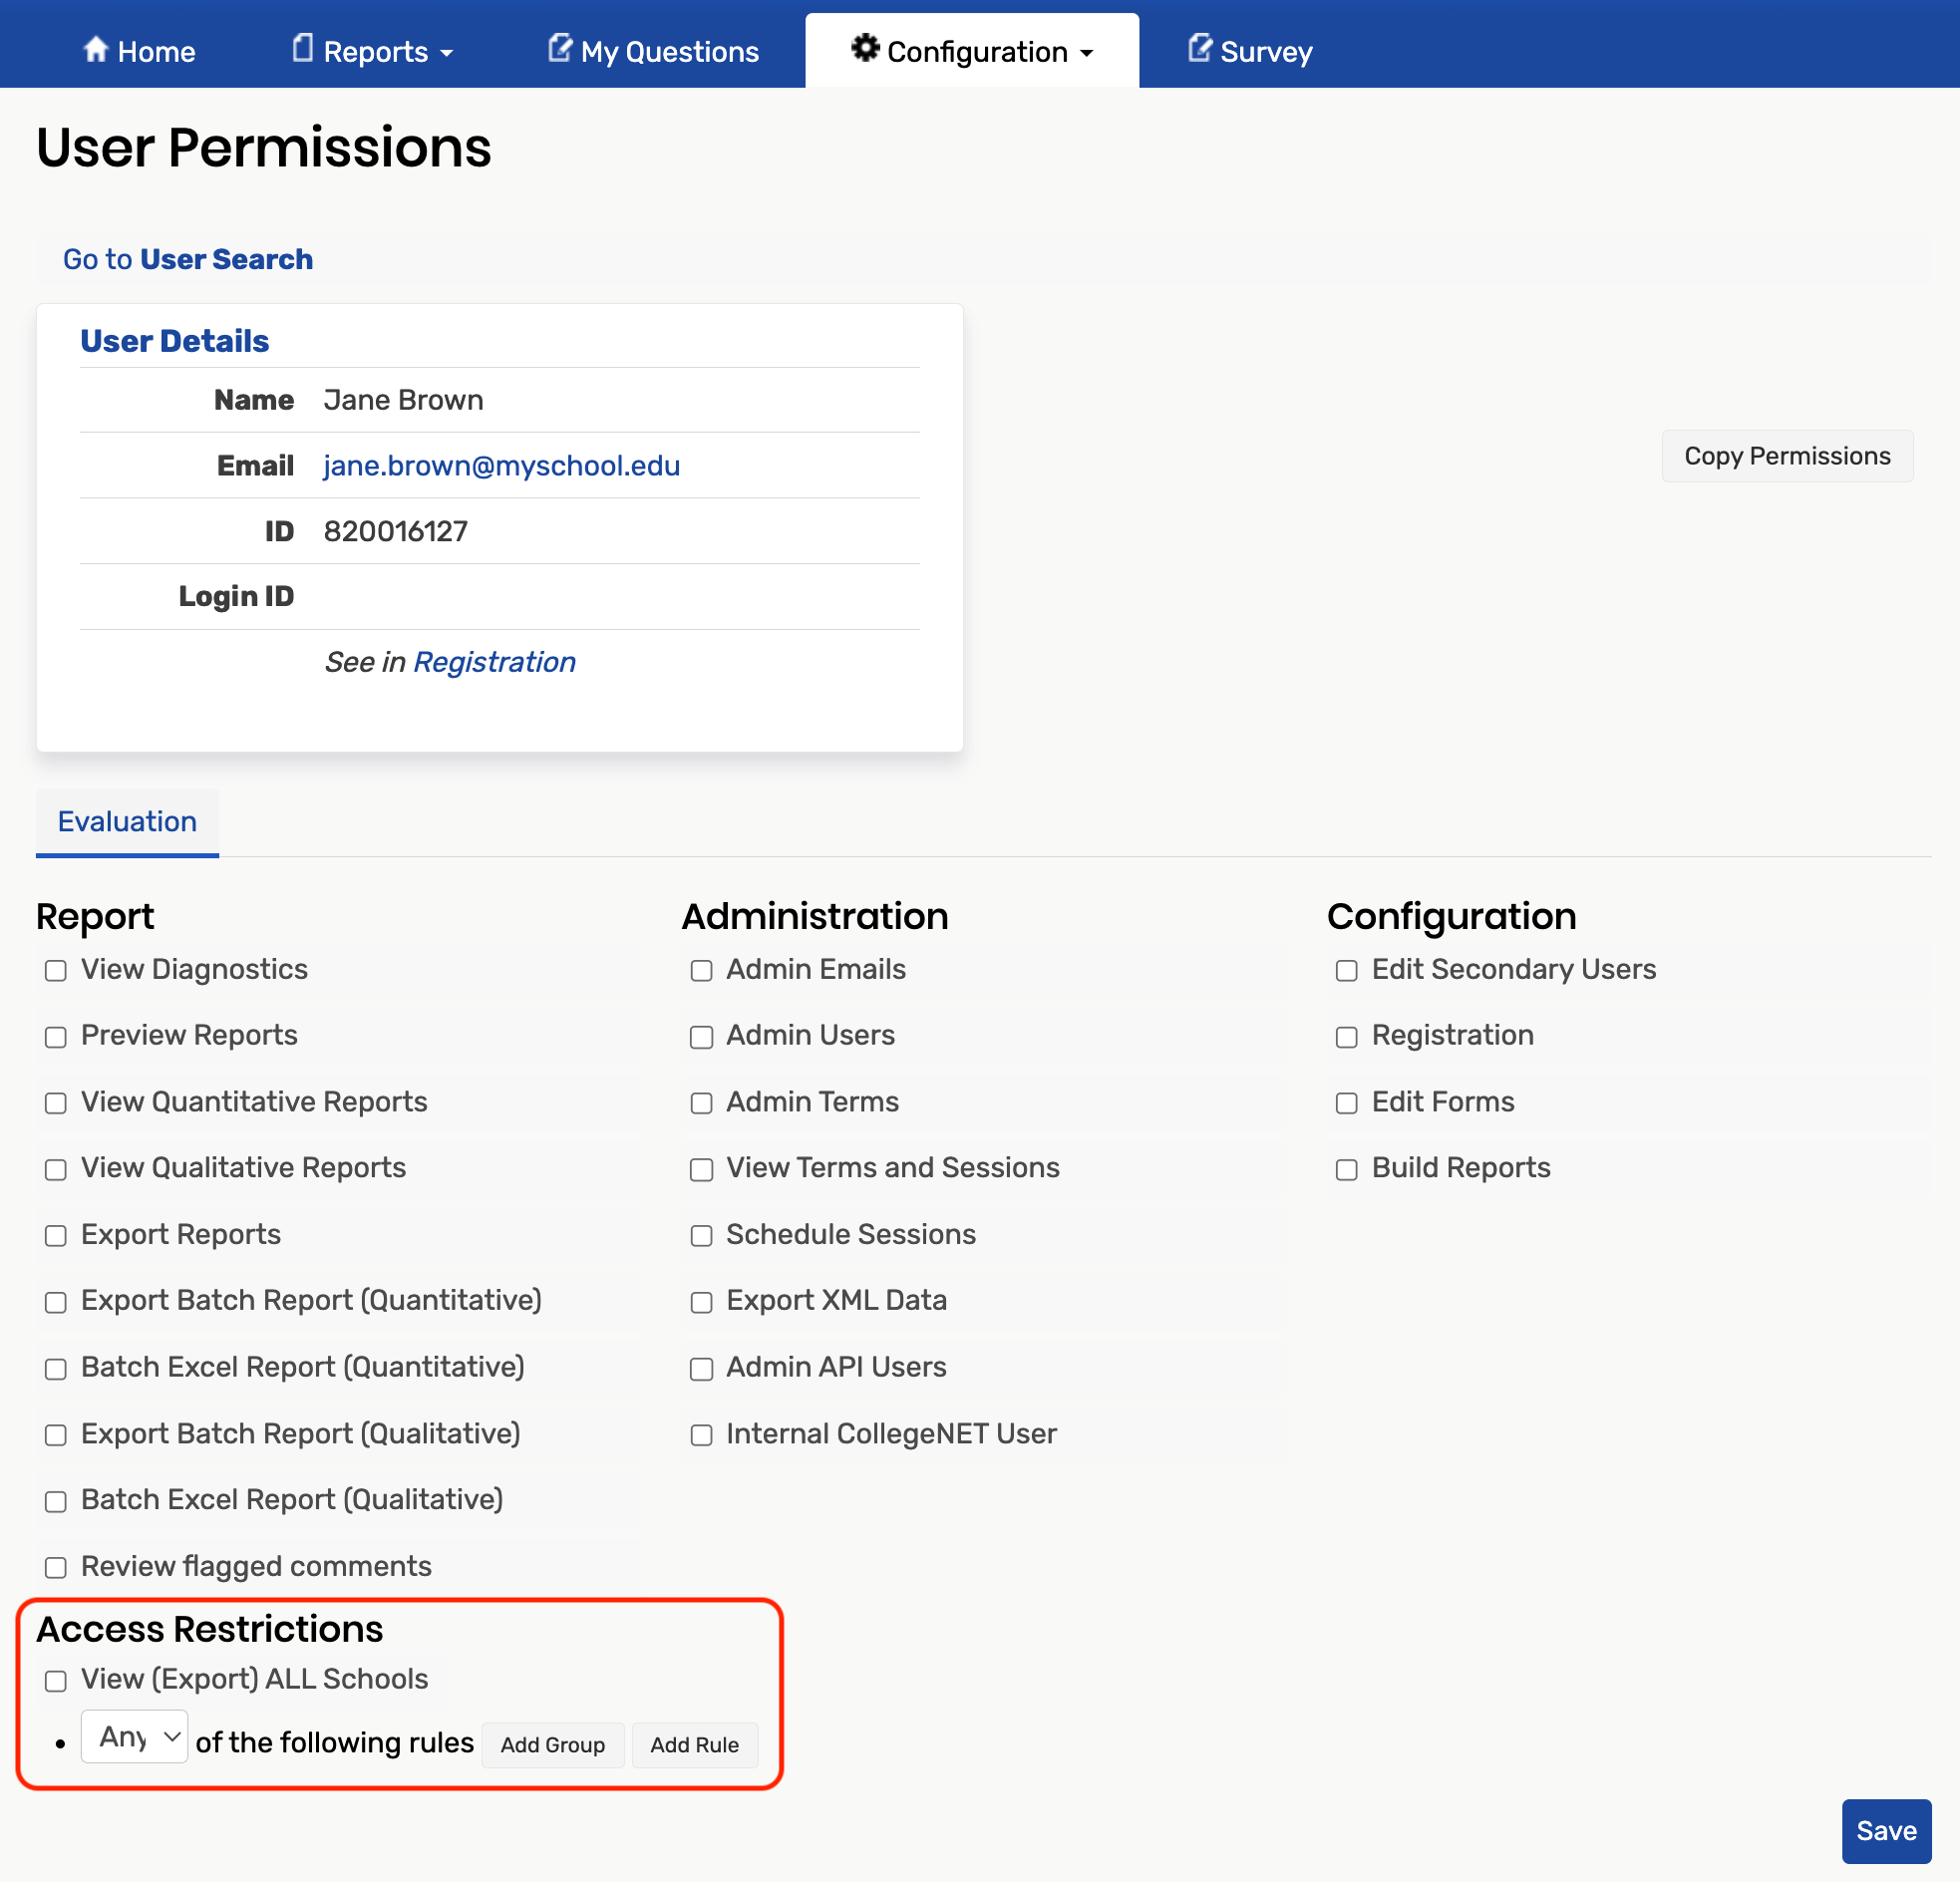 Access restrictions on the user permissions page